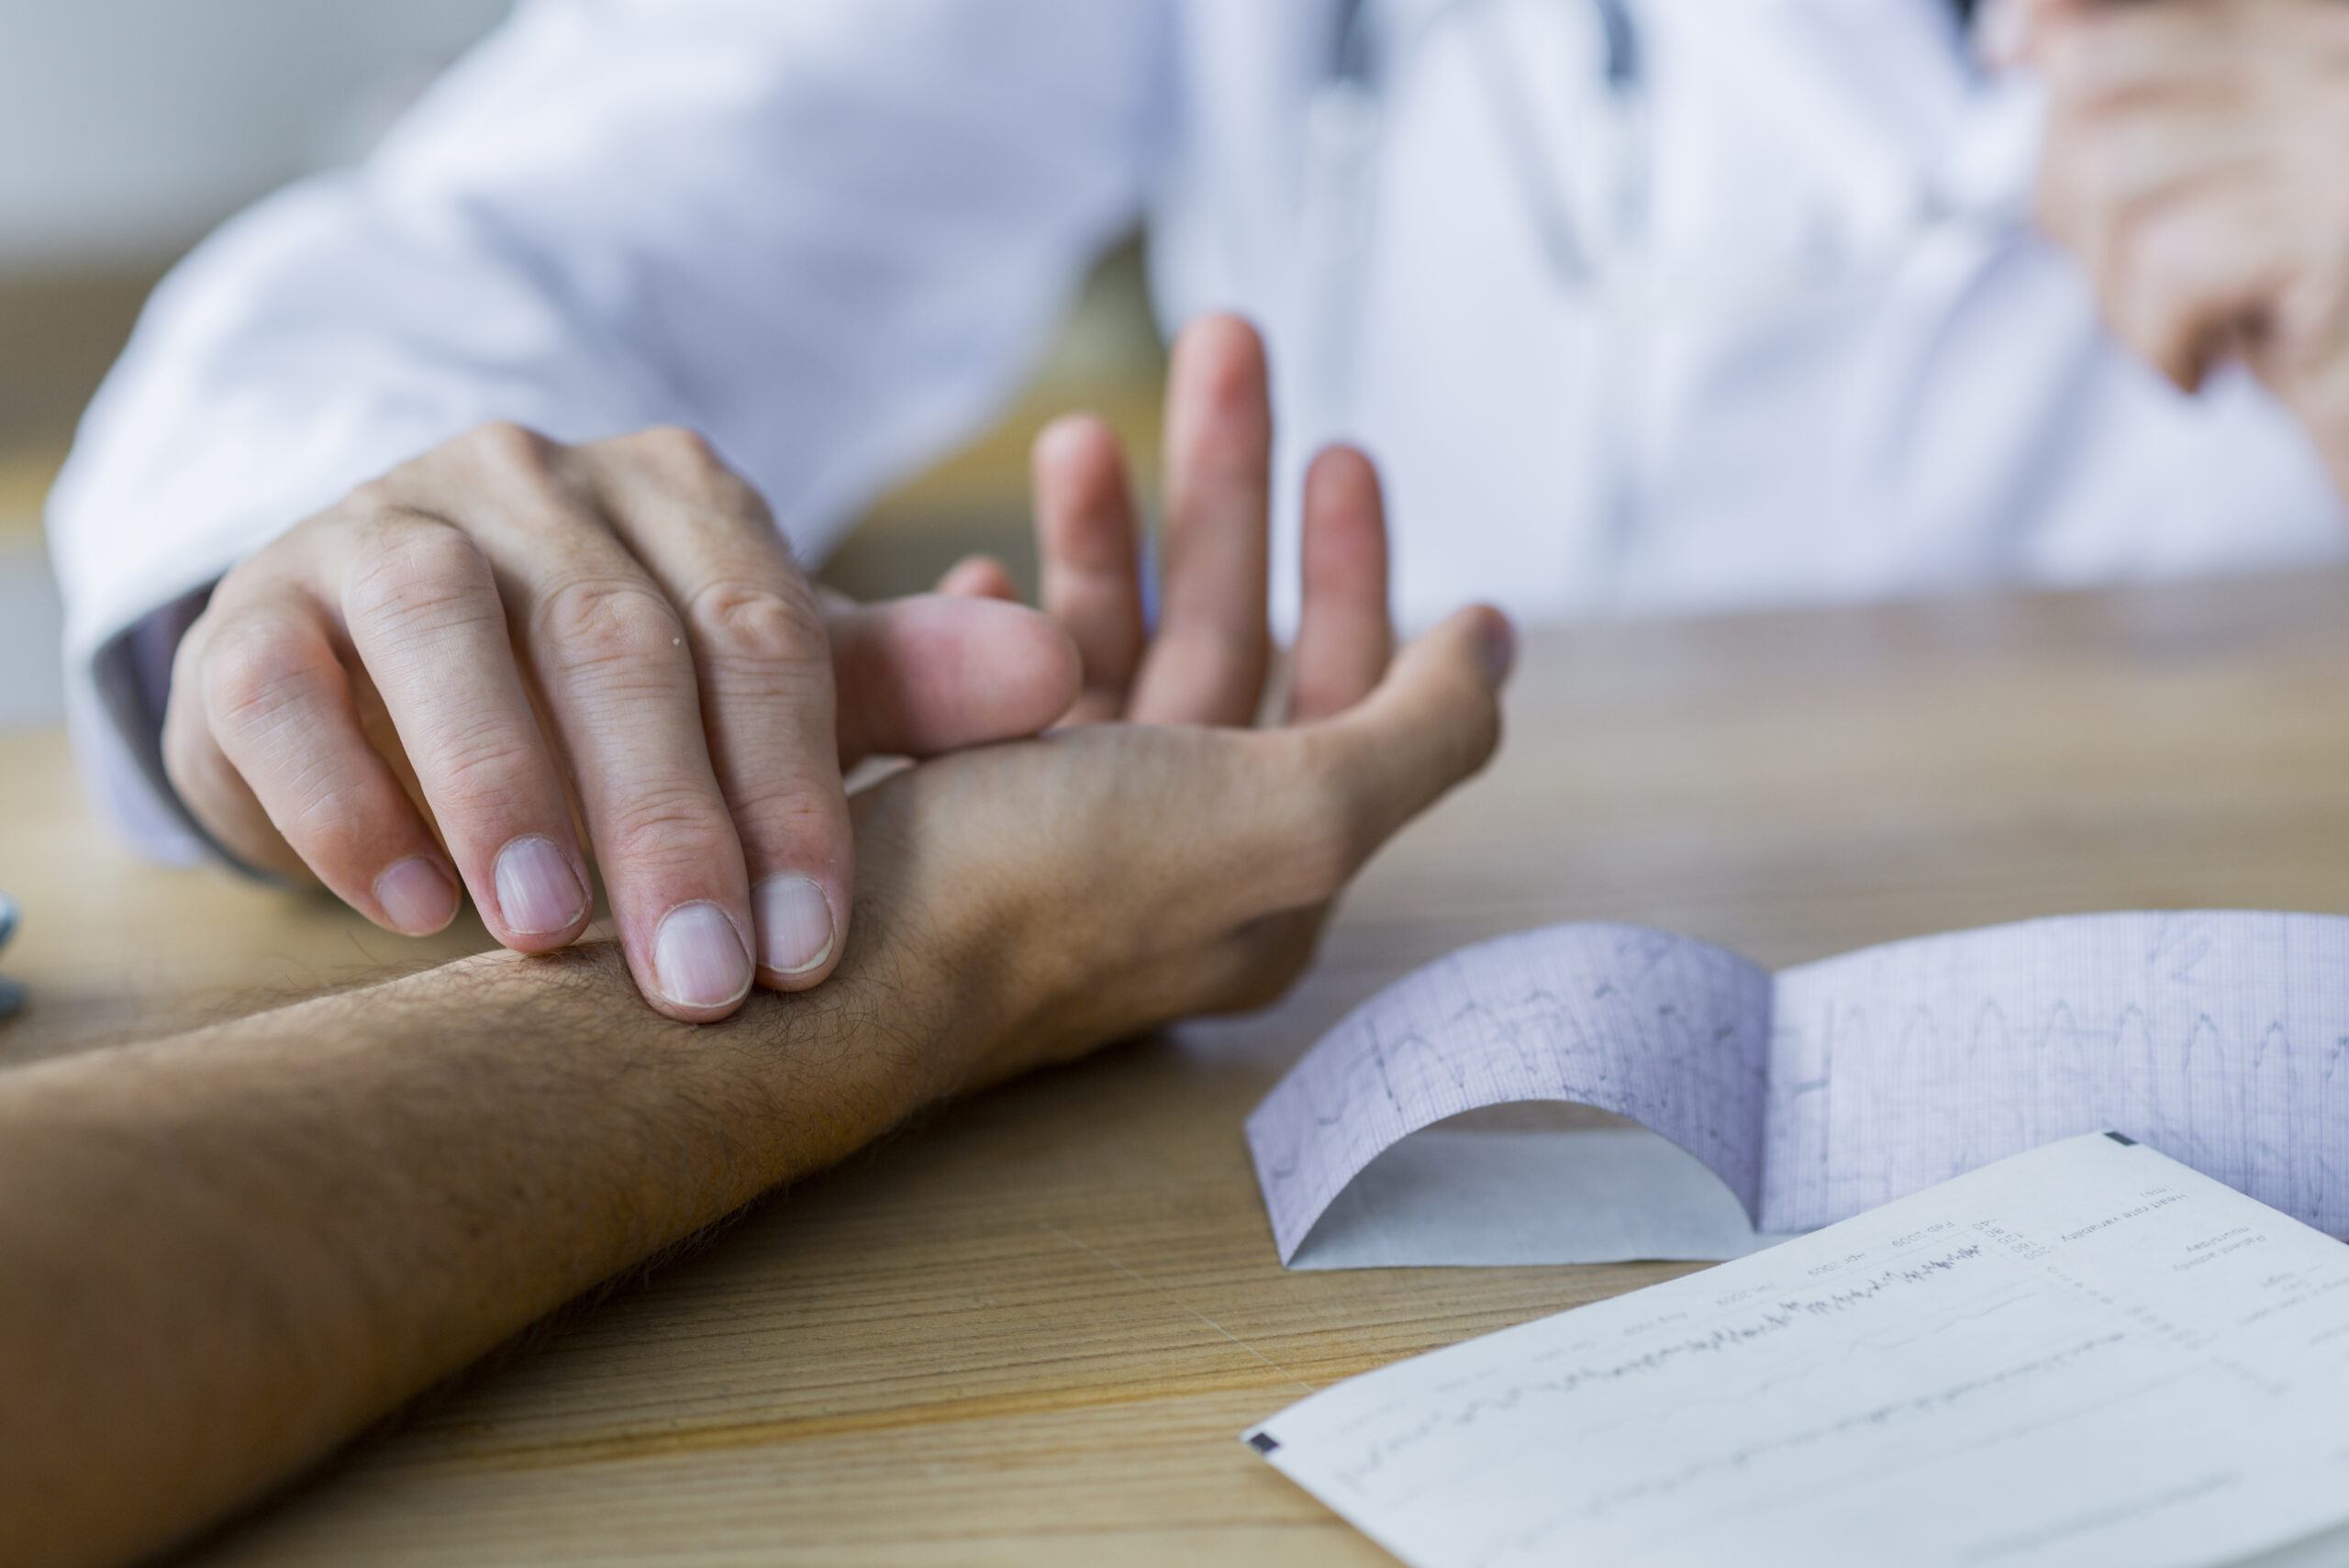 How to Find the Best Doctor for Rheumatoid Arthritis